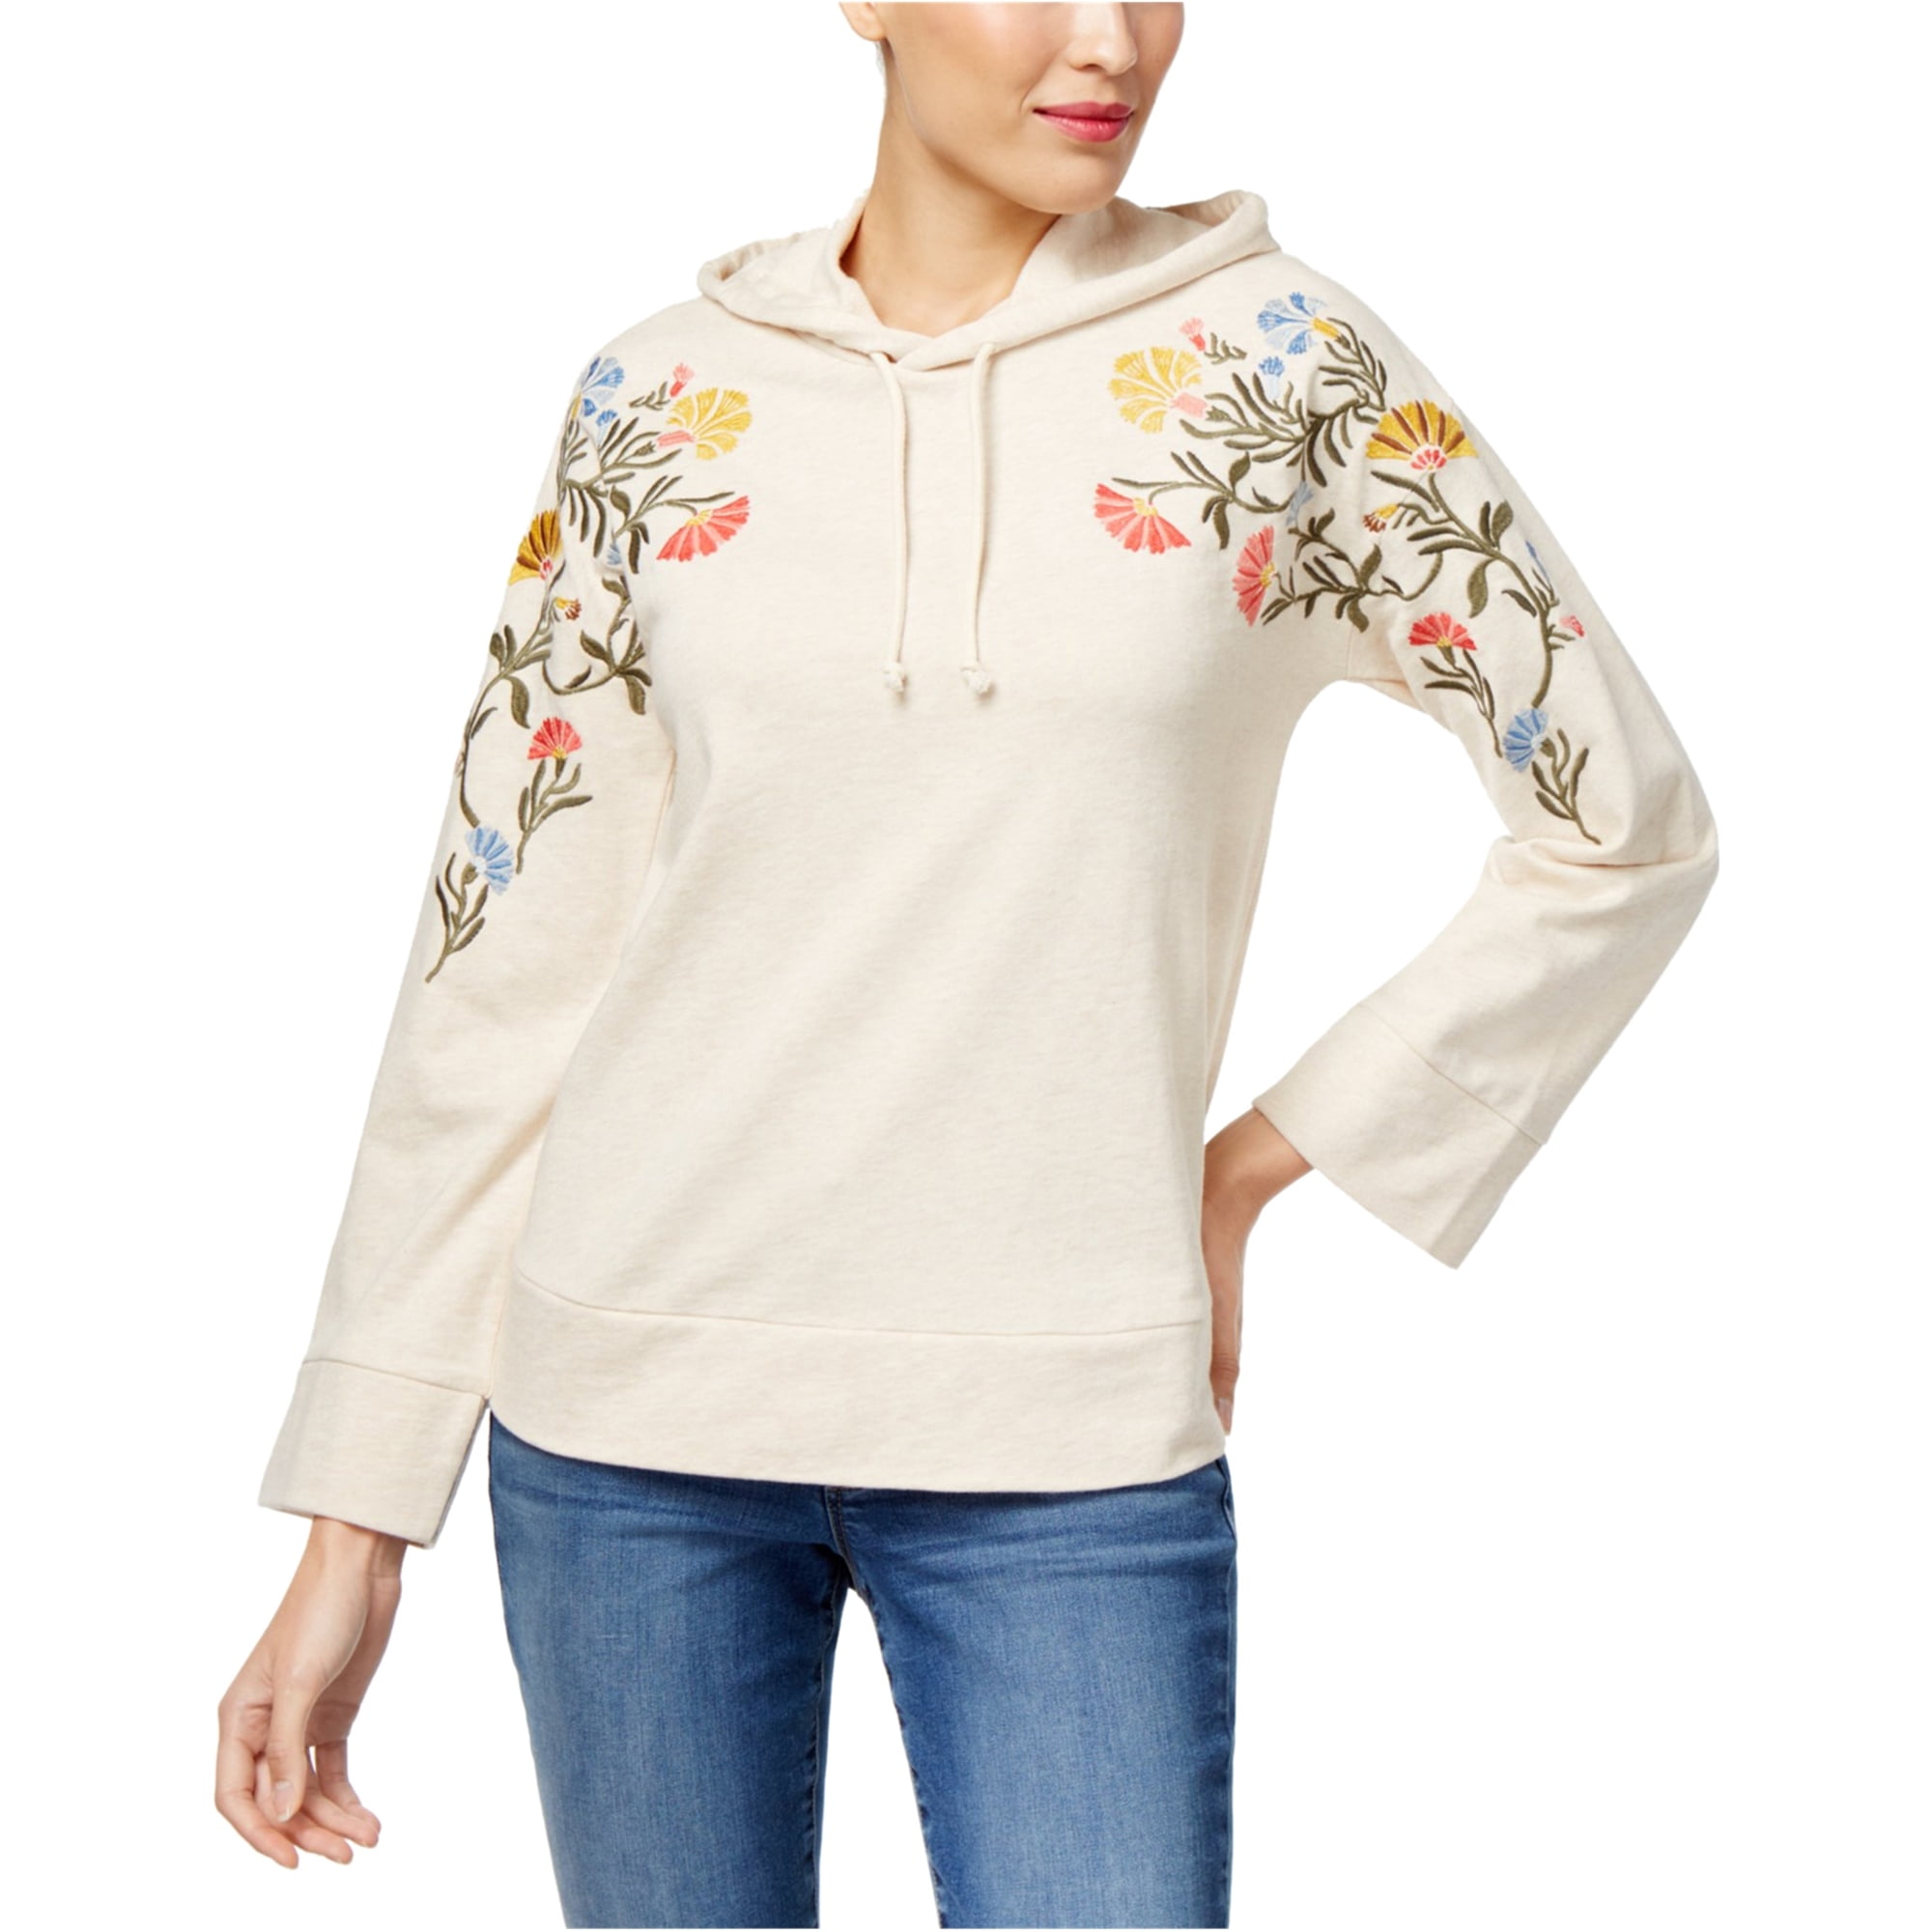 Style & Co. - Style & Co. Womens Embroidered Hoodie Sweatshirt, Beige